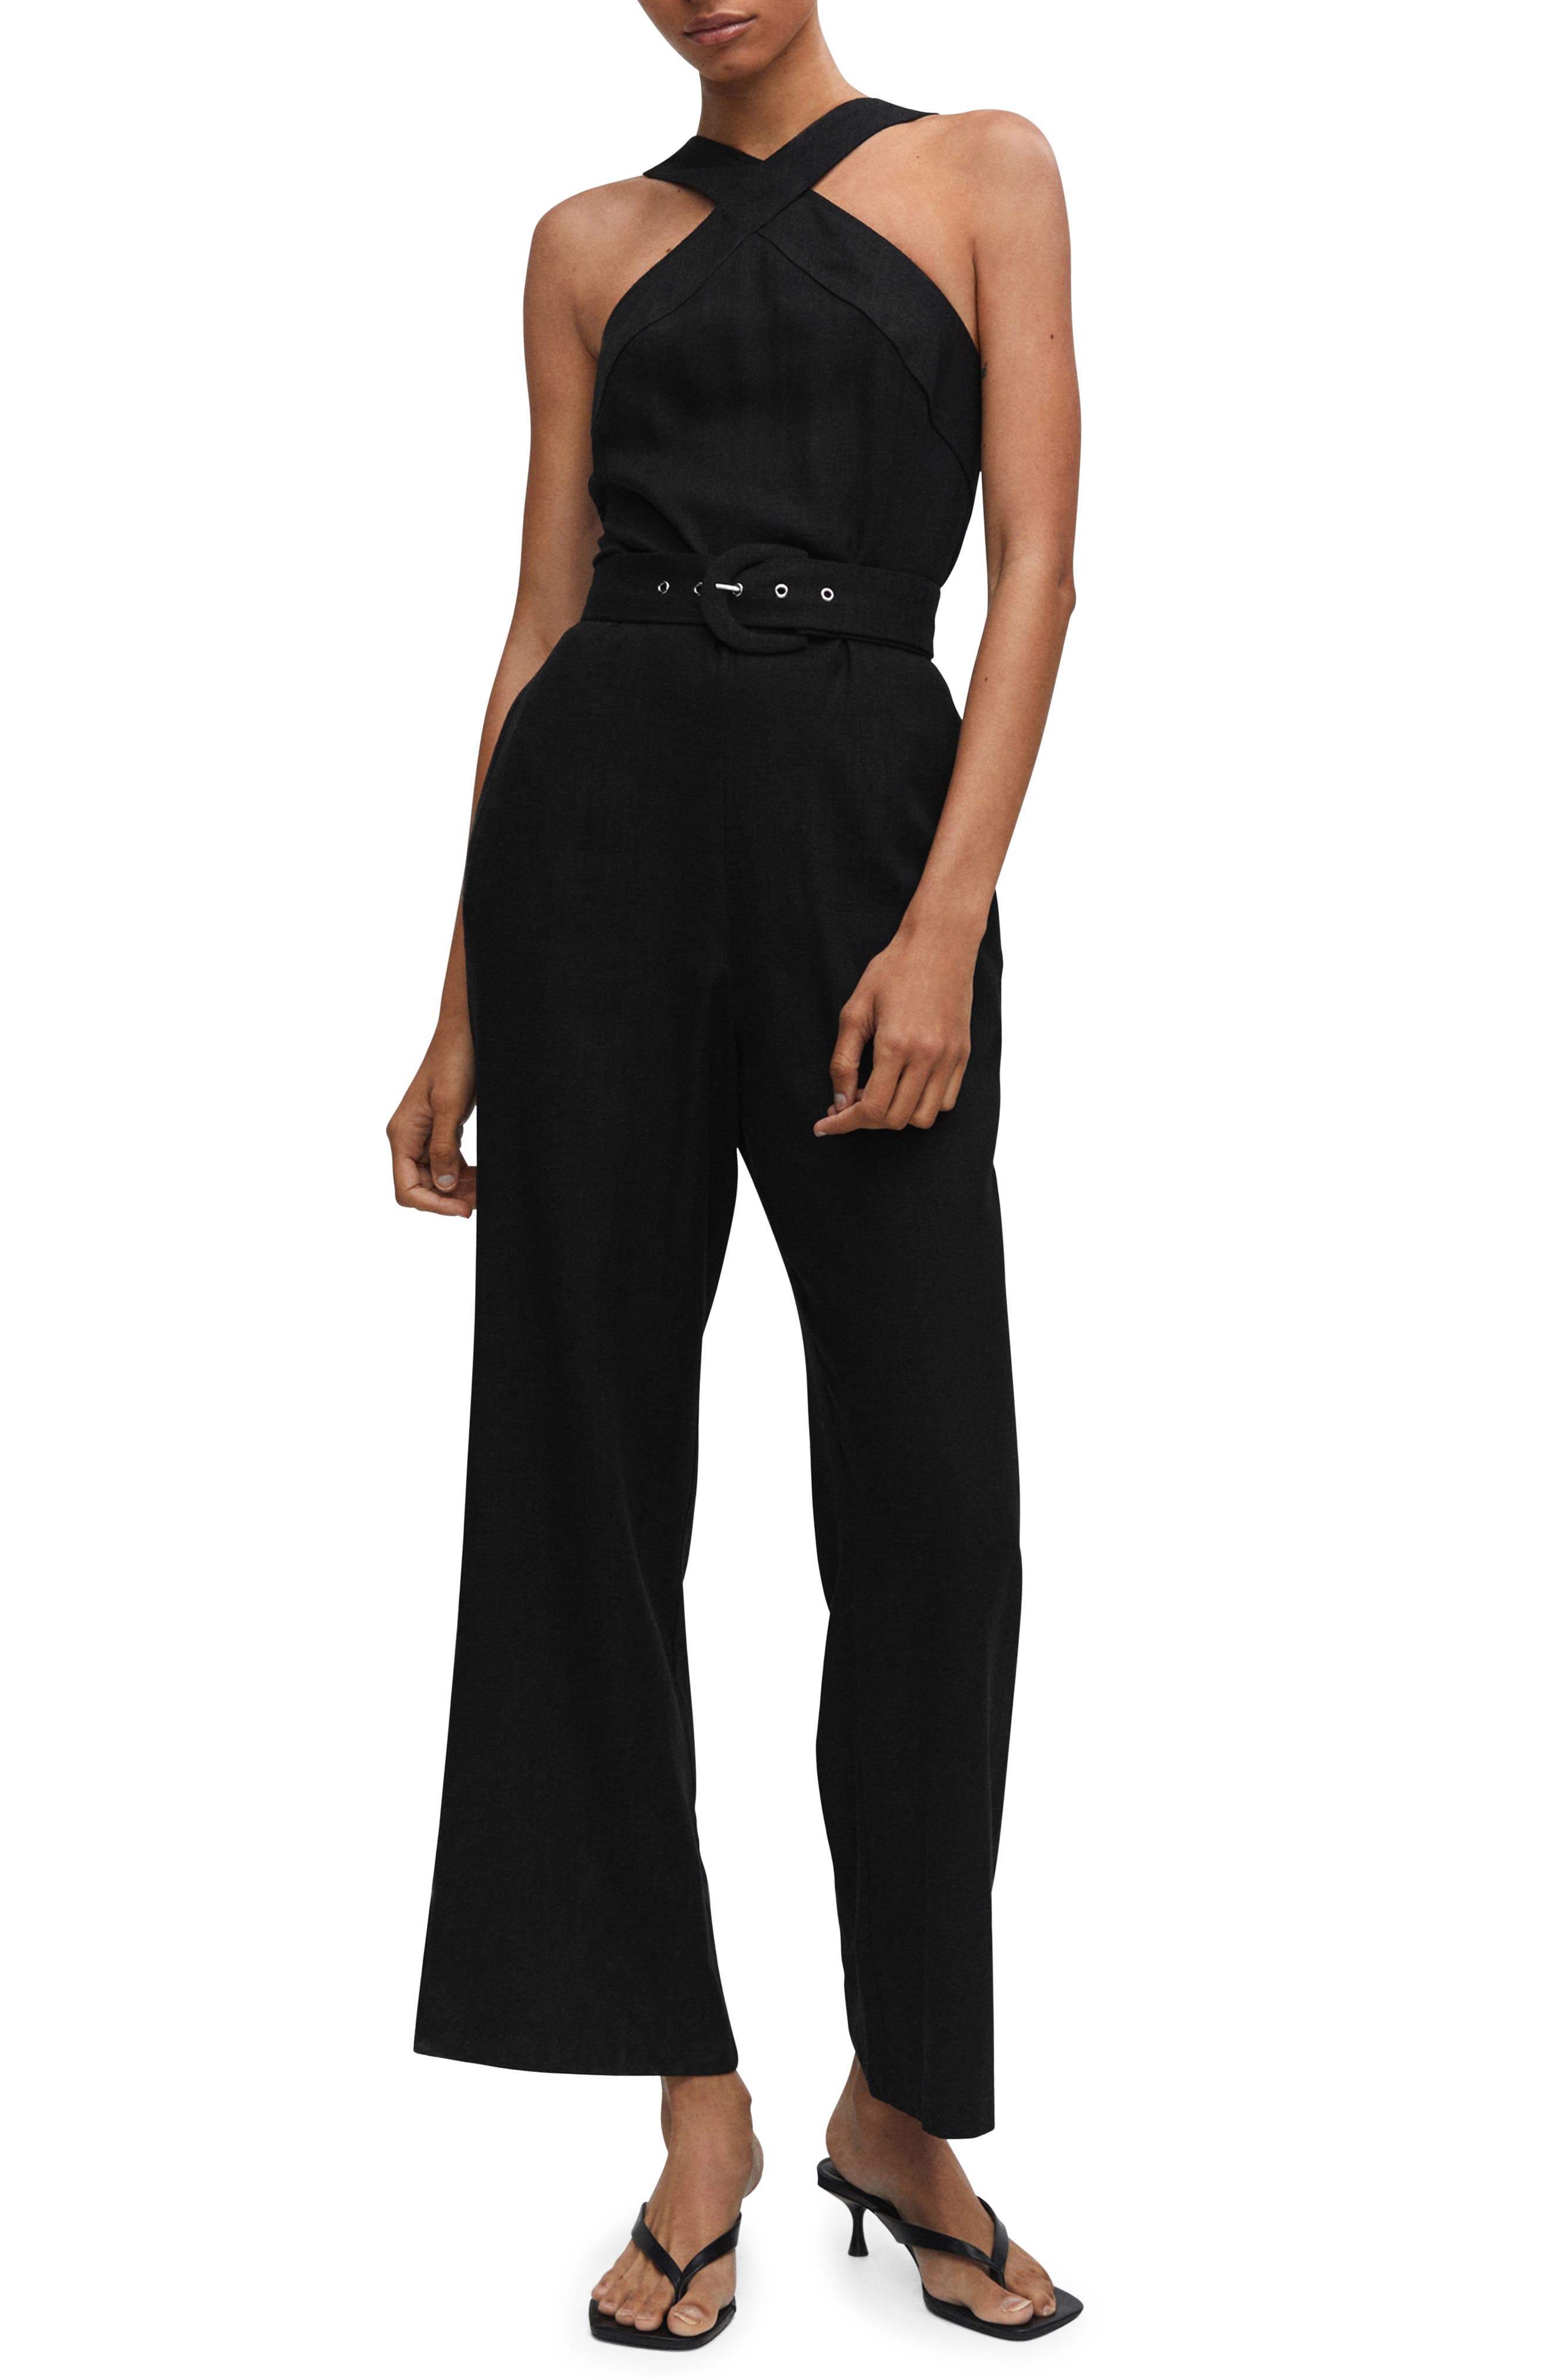 Monki ribbed jersey jumpsuit in black